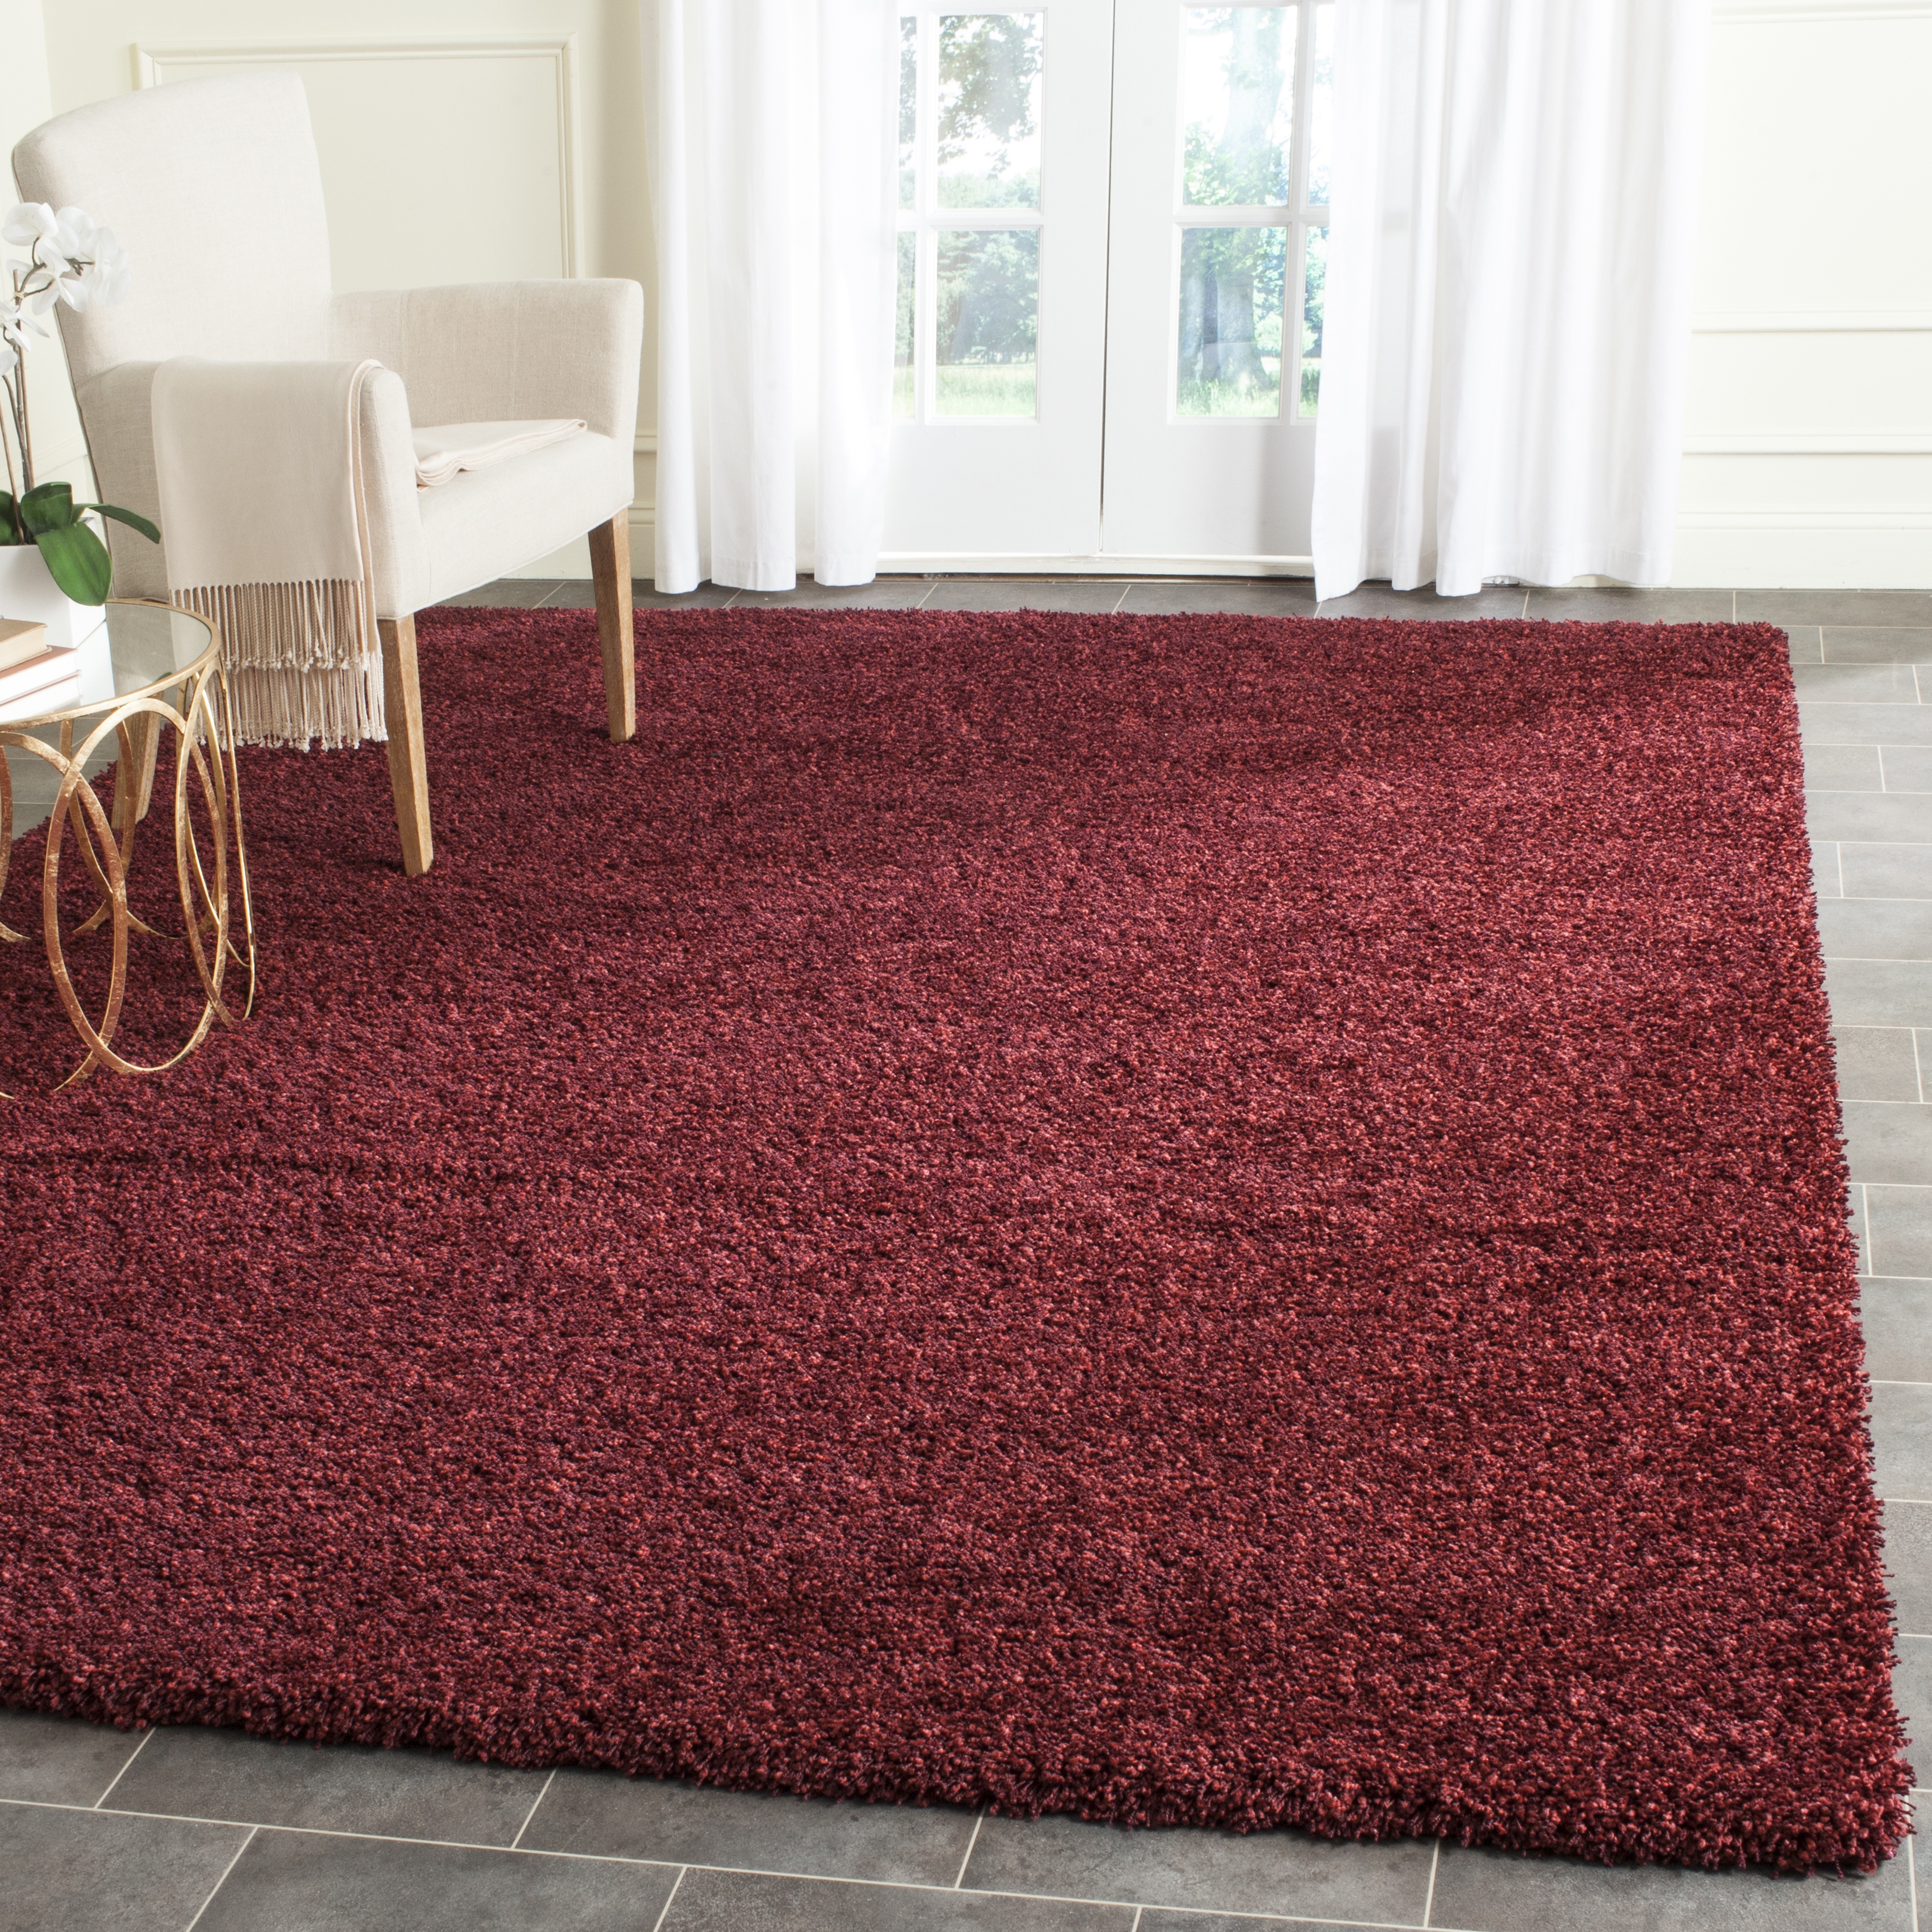 Arlo Home Woven Area Rug, SGN725-4242, Maroon,  9' X 12' - Image 1